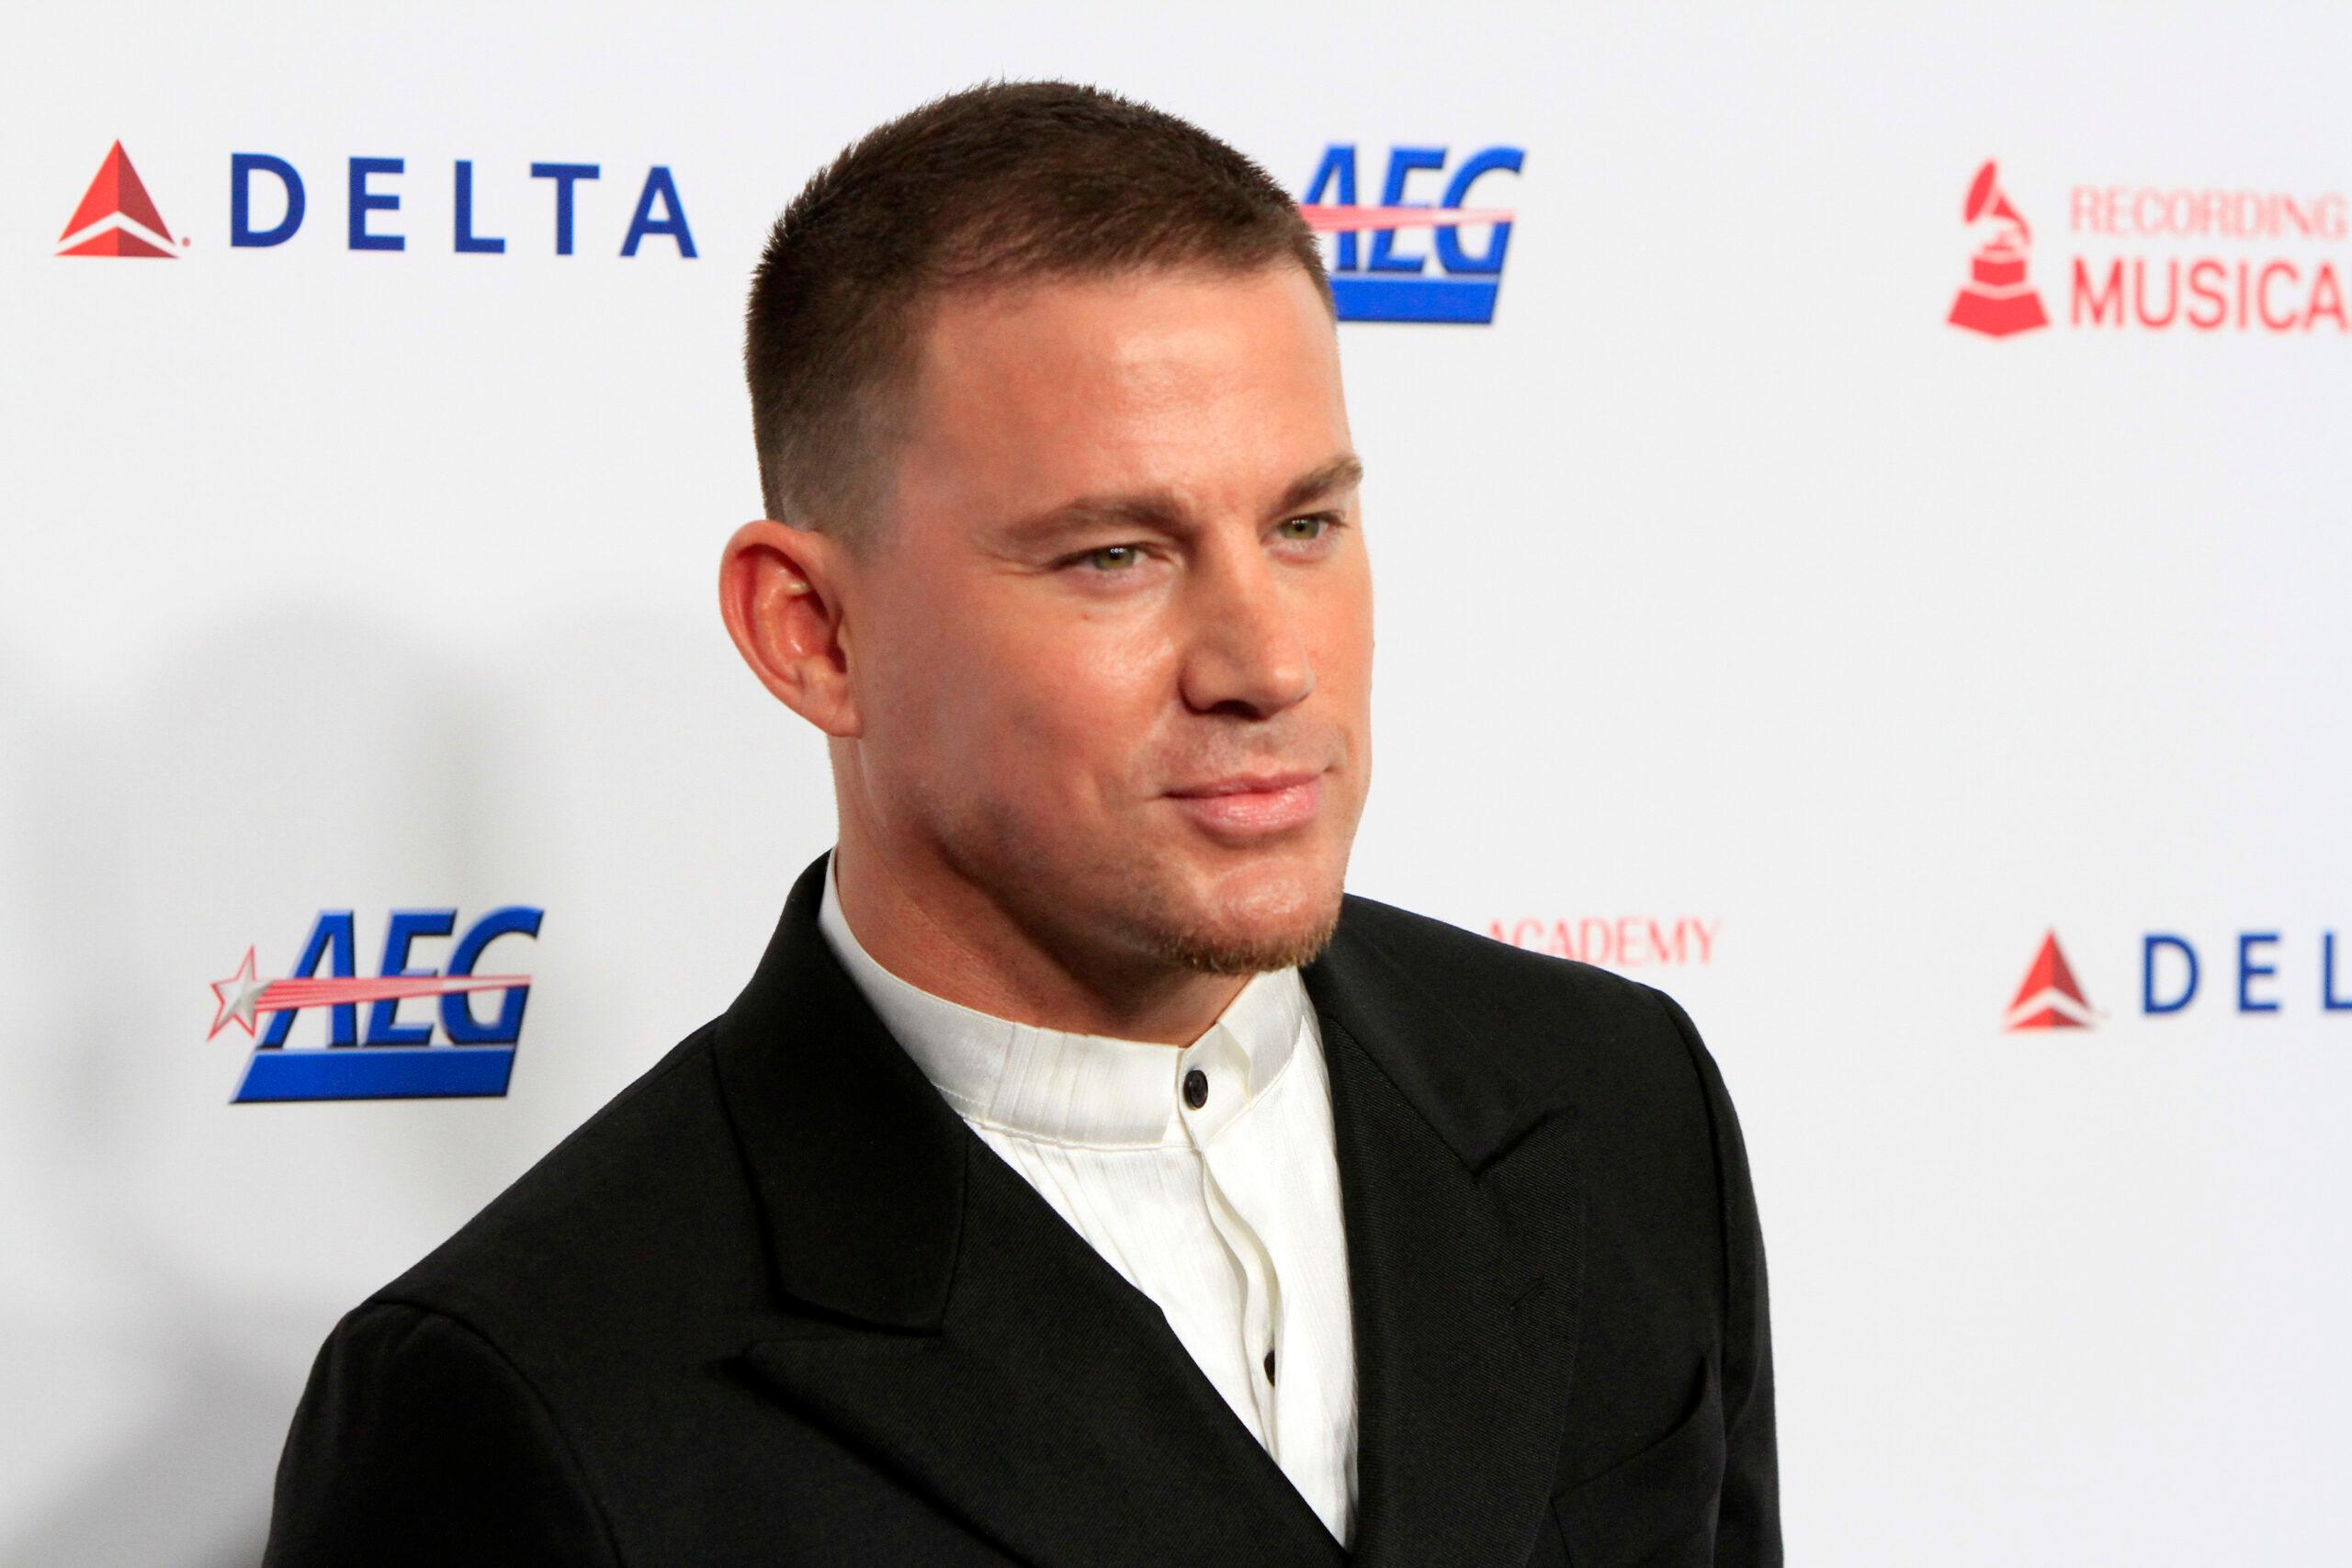 A photo of Channing Tatum at en event sporting a black suit and white inner T-shirt.